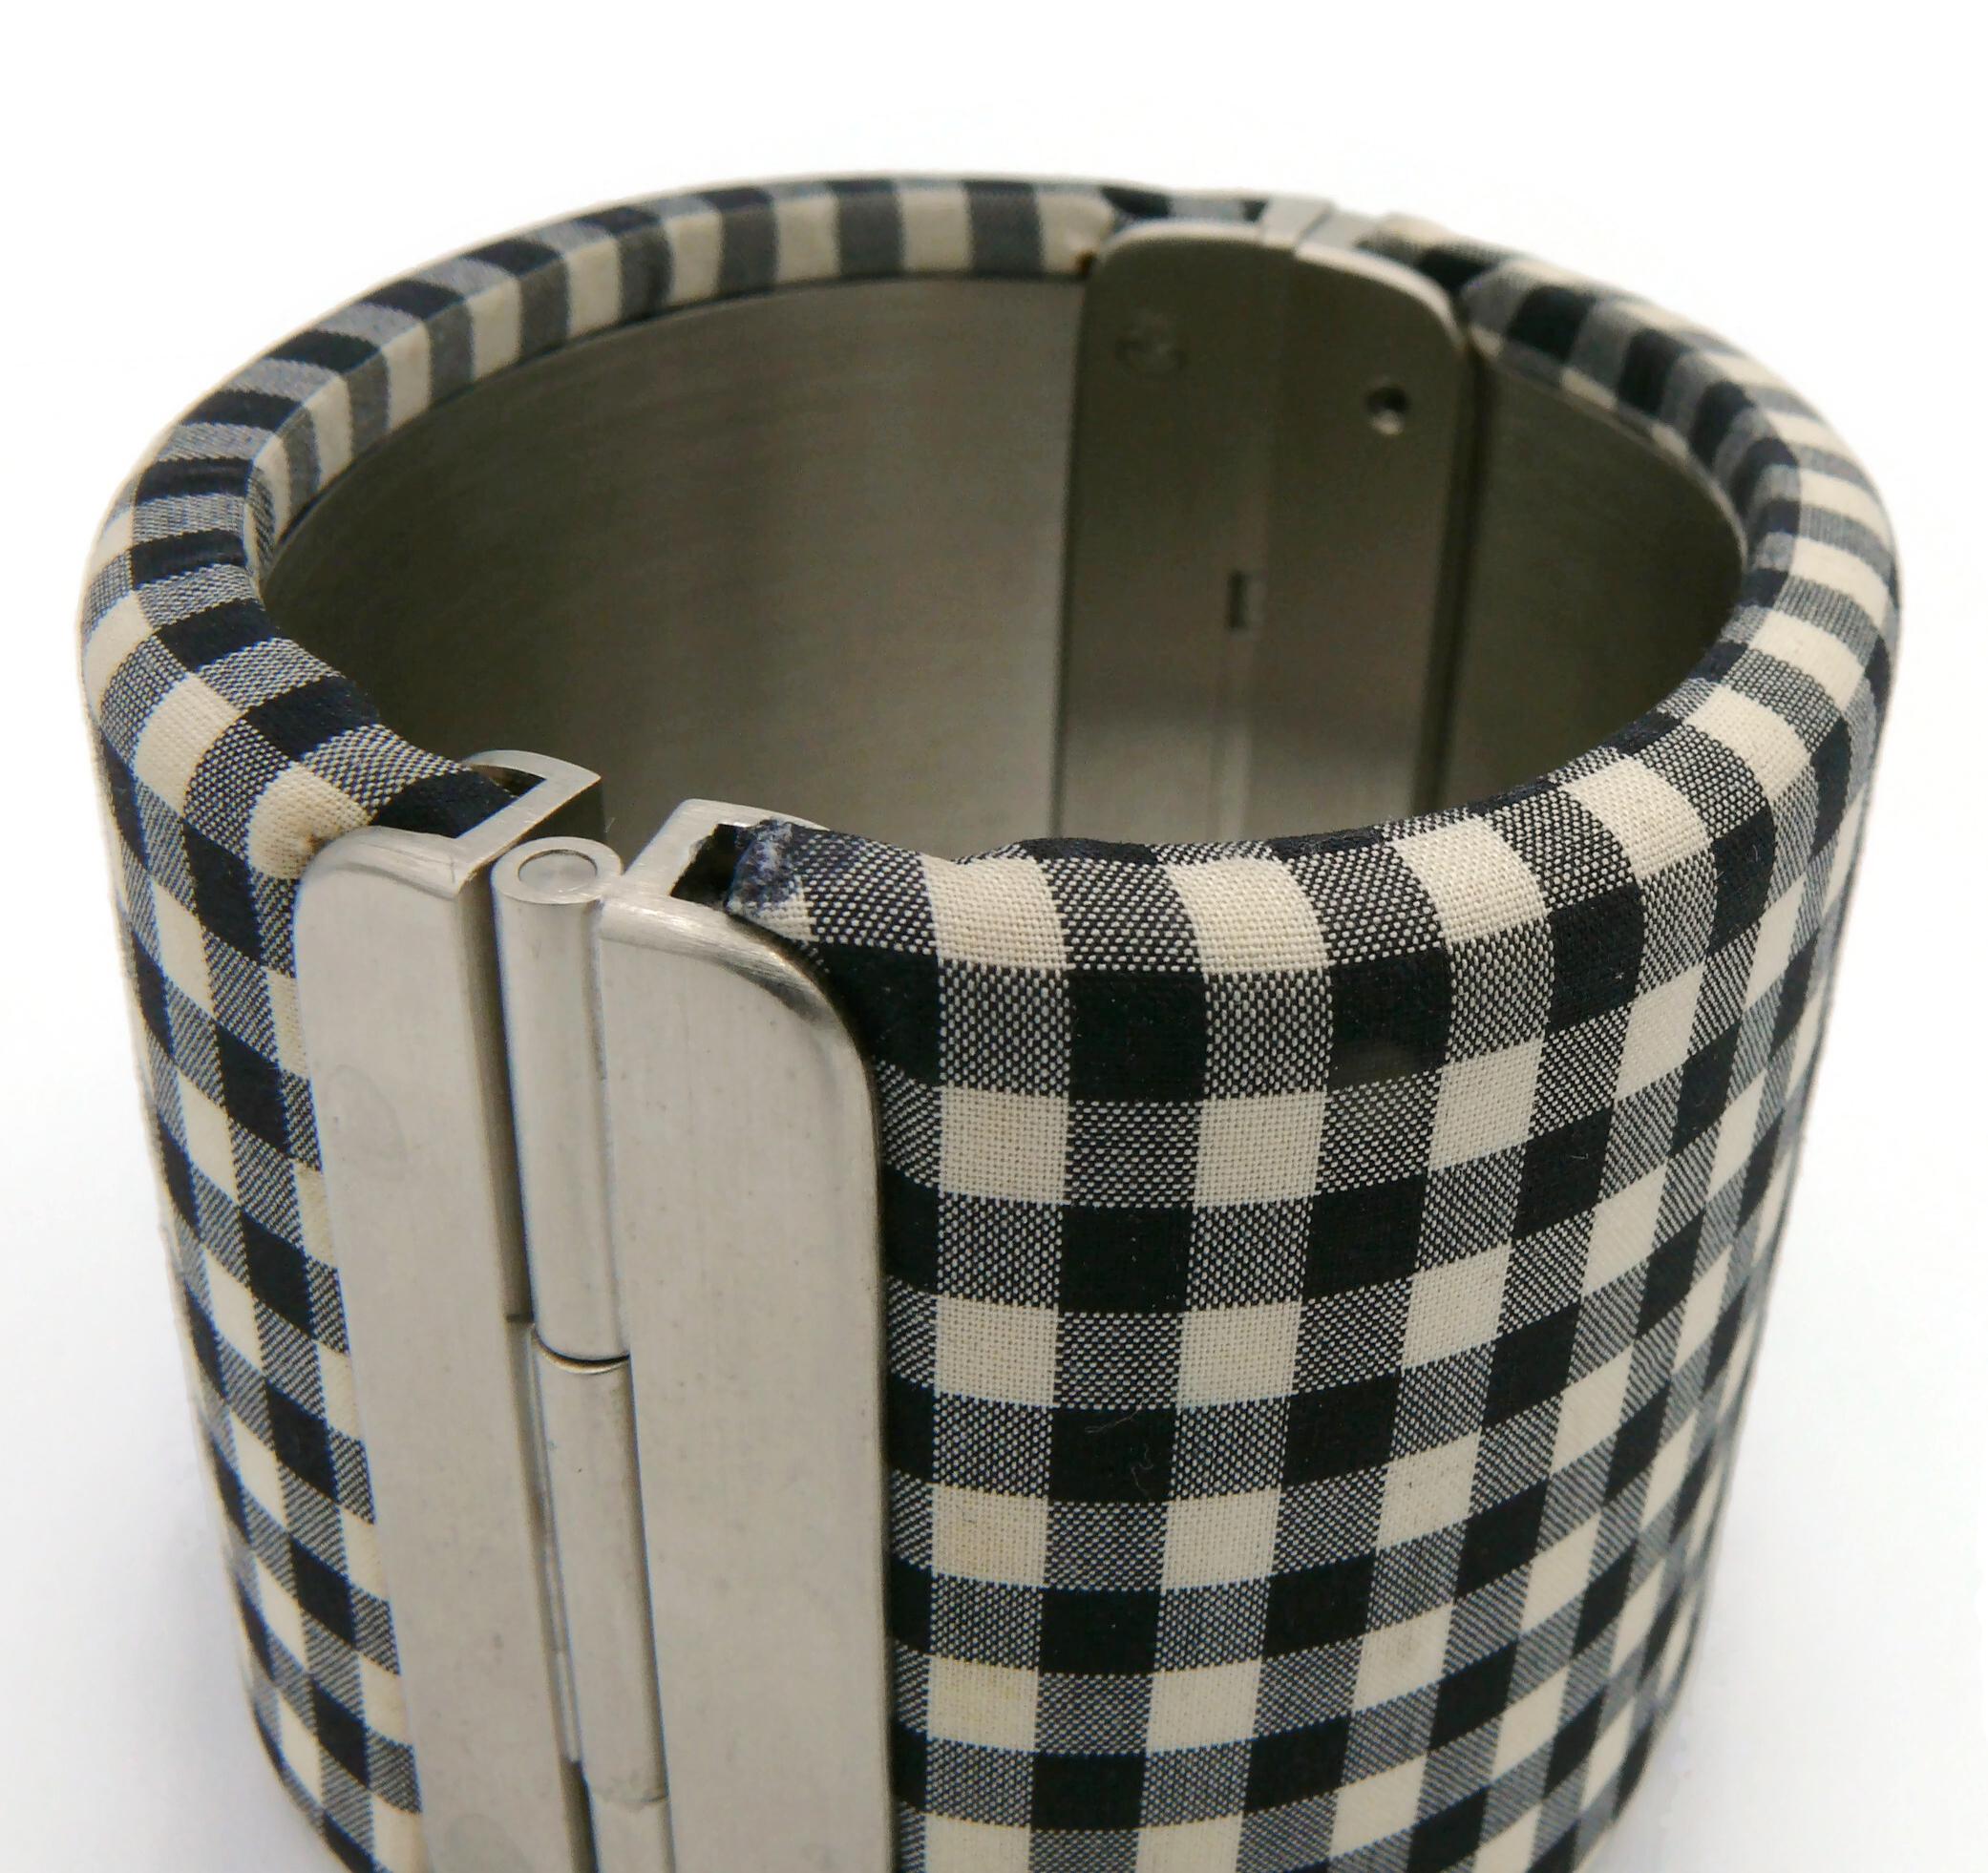 CHANEL Black and White Gingham Vichy Print Cuff Bracelet, Resort Collection 2011 For Sale 5